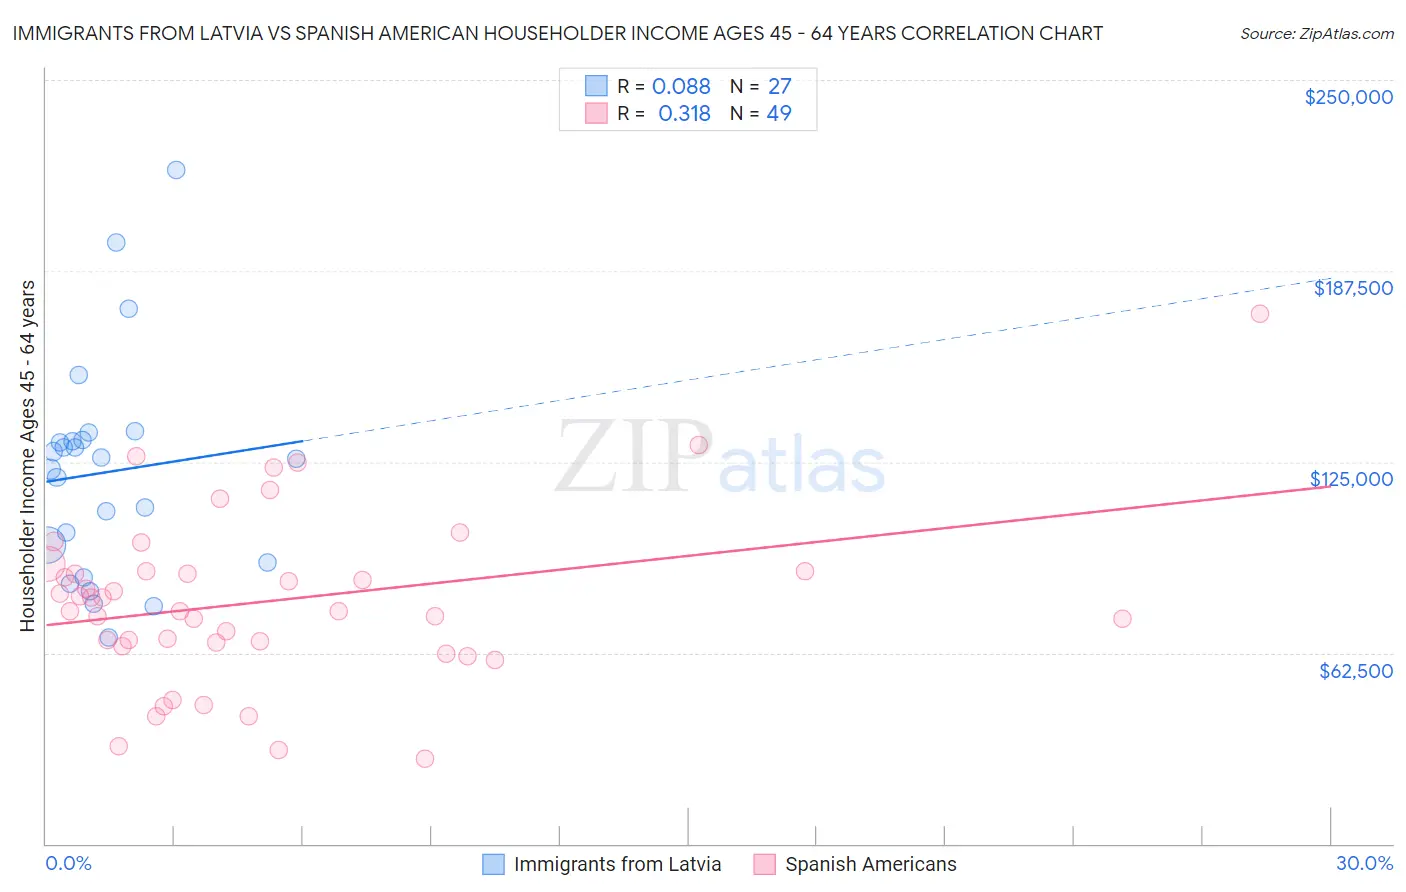 Immigrants from Latvia vs Spanish American Householder Income Ages 45 - 64 years